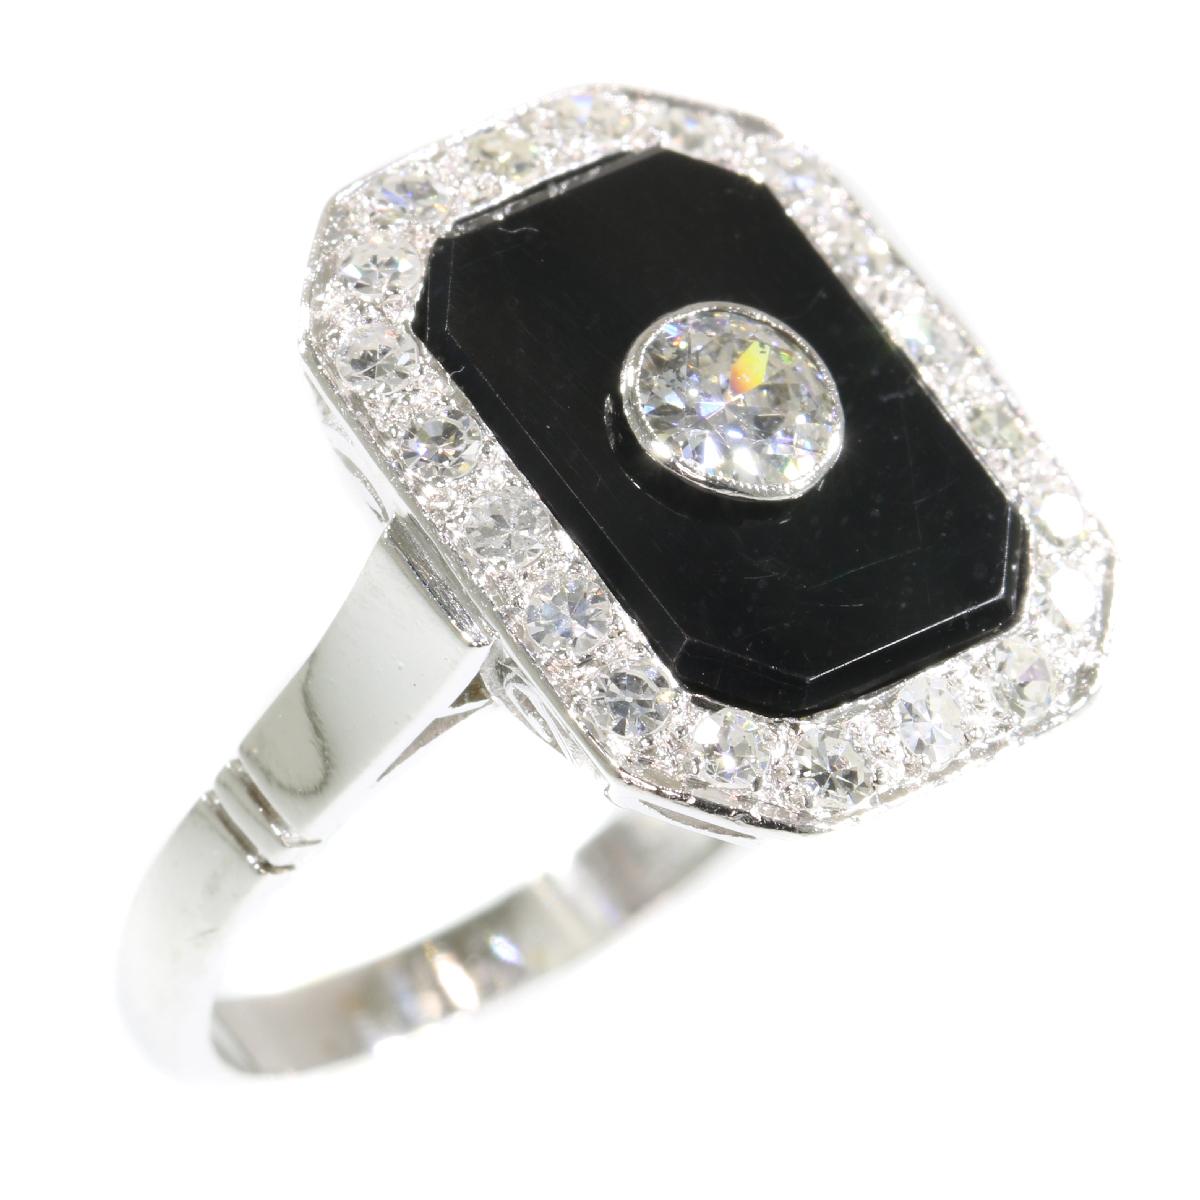 Vintage Platinum Art Deco Style Diamond and Onyx Ring from the 1950s 2